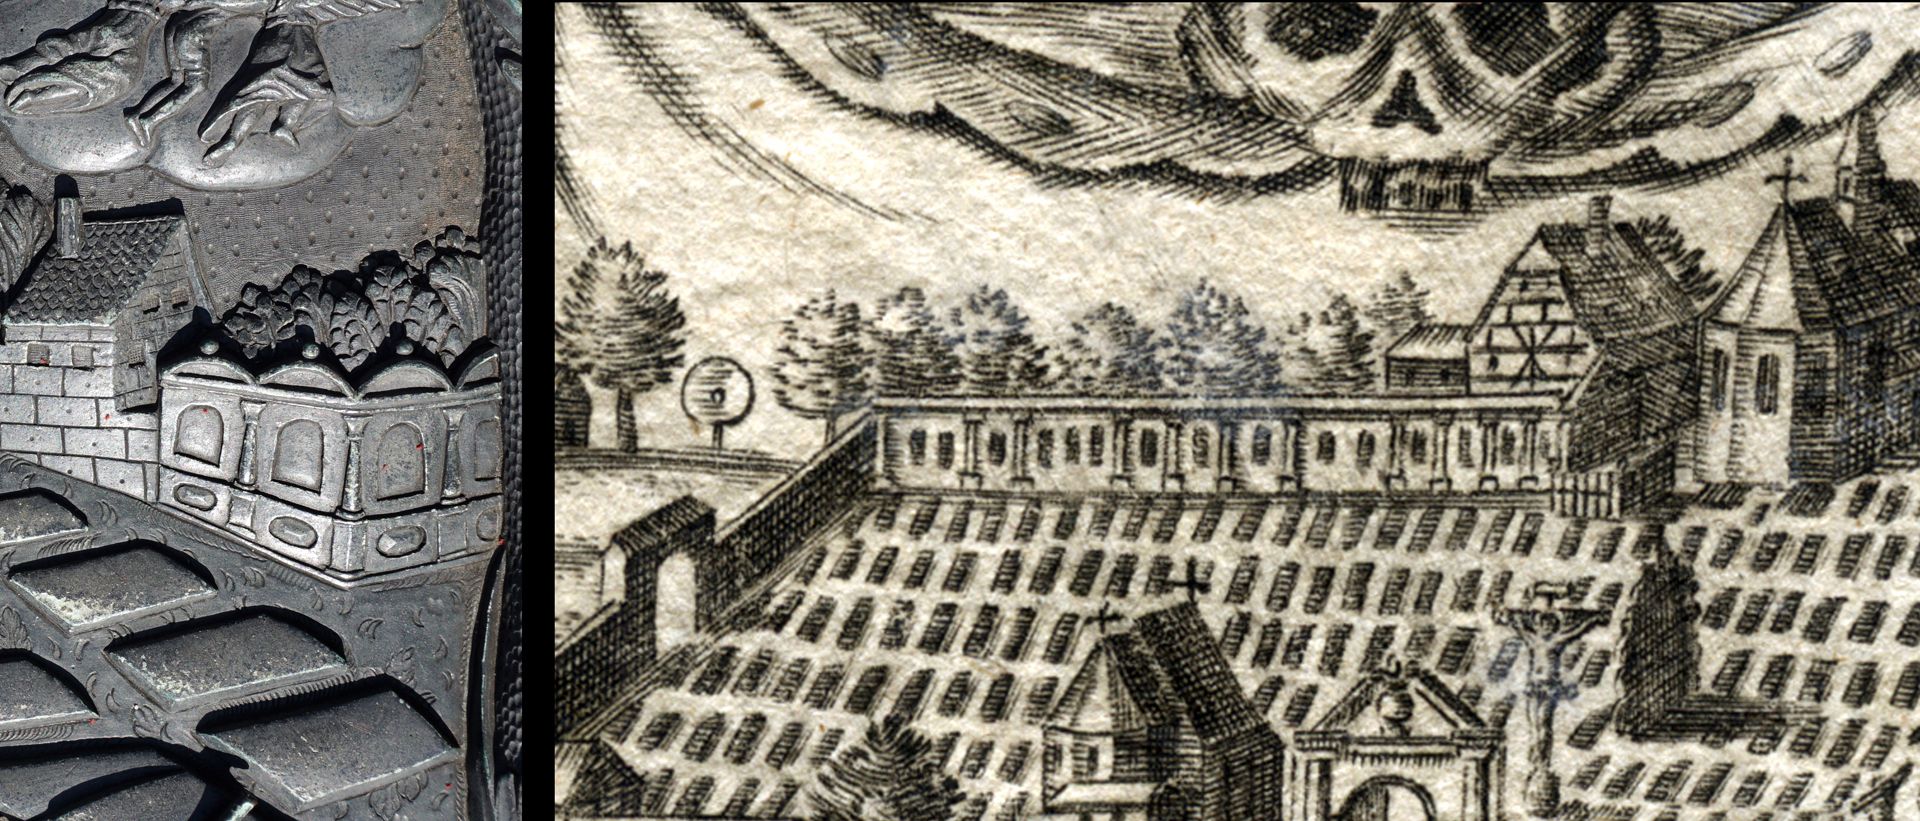 epitaph for Wolfgang Endter and wife Maria Oeder Comparative picture by Johann Azelt (copperplate engraving 1682) with arcade wall in front of the "large parish garden" that existed until 1714